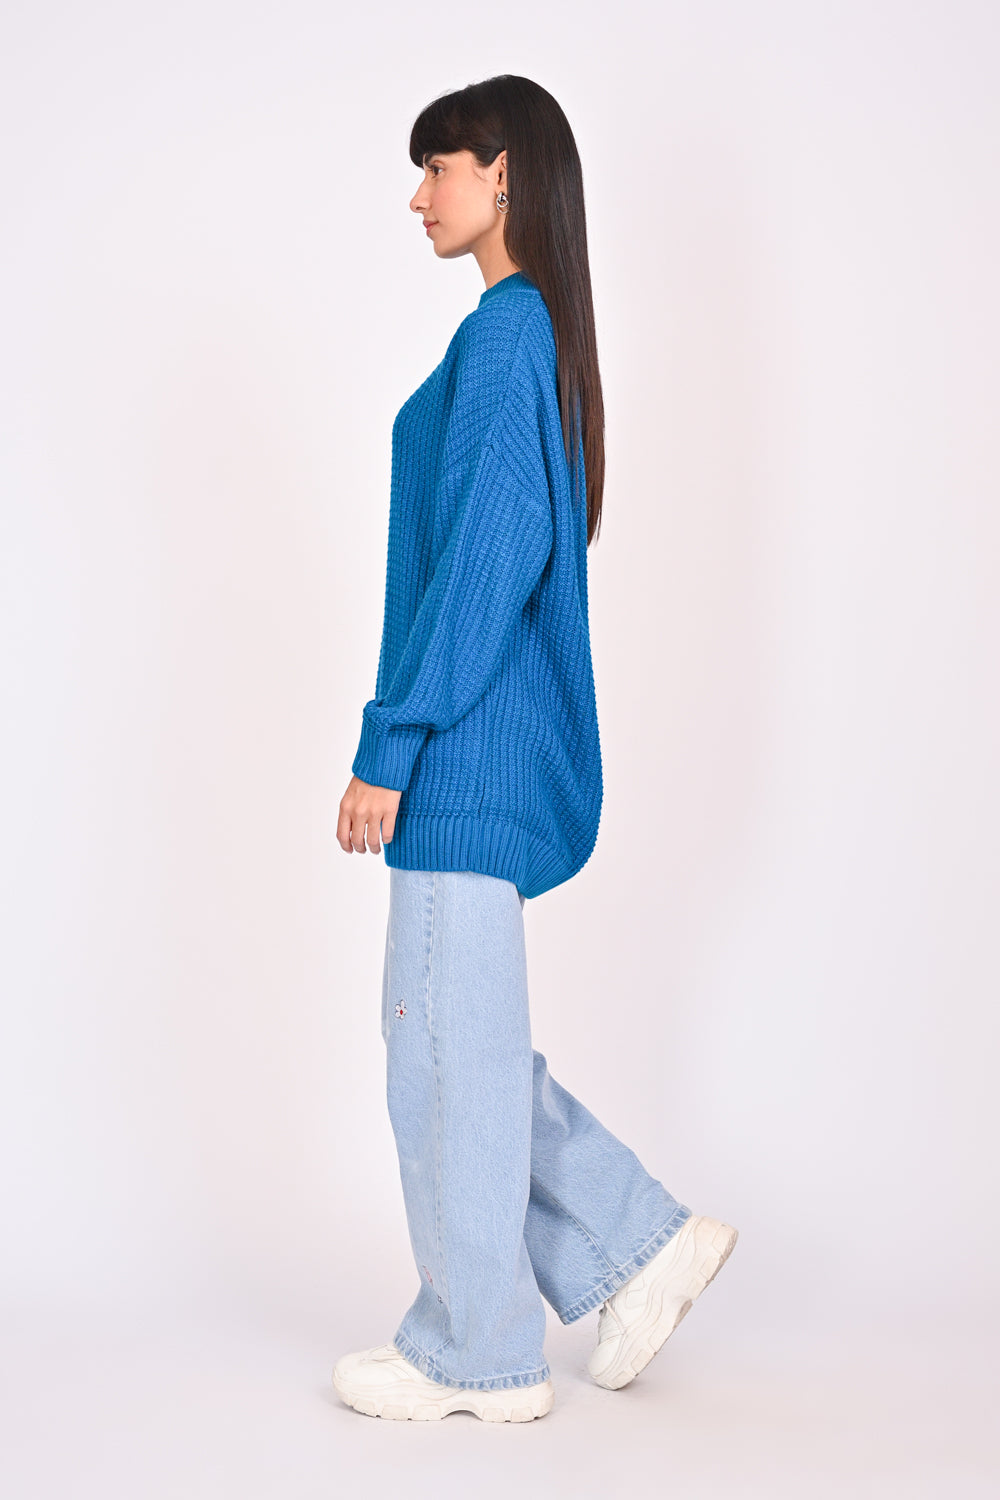 RELAXED FIT MOCK NECK SWEATER